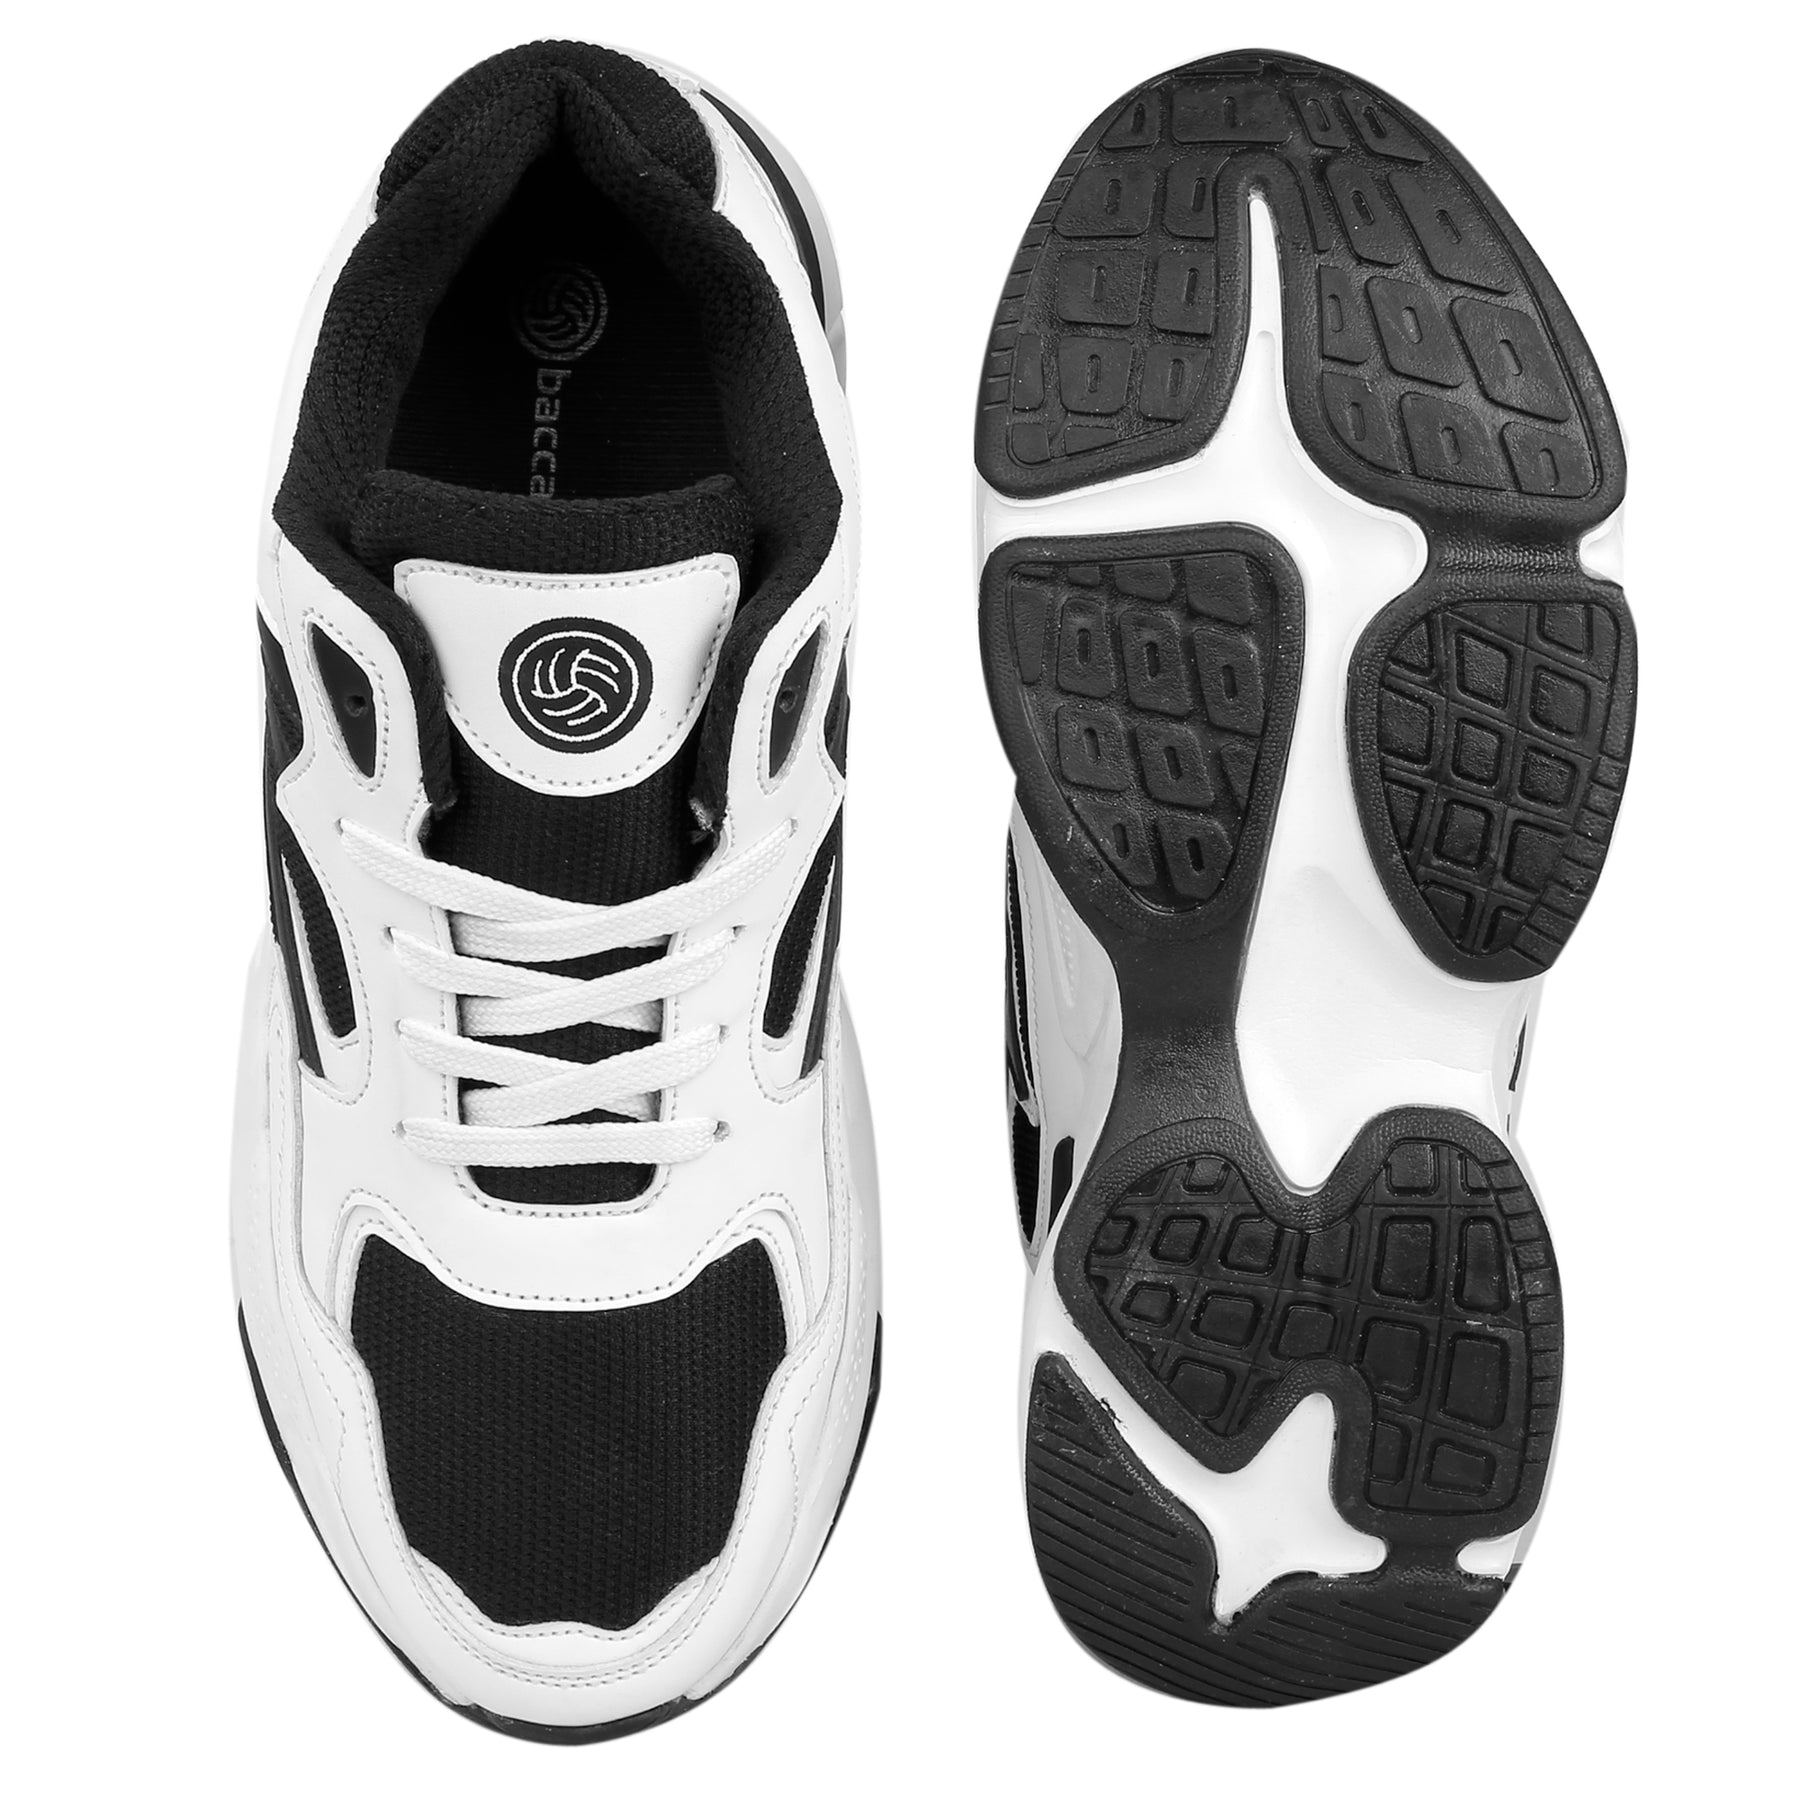 Bacca Bucci ZEUS Sneakers/Running Shoes with Chunky Rubber Outsole for Running, Walking, Training, Gyming, Streets, Parties & Fun